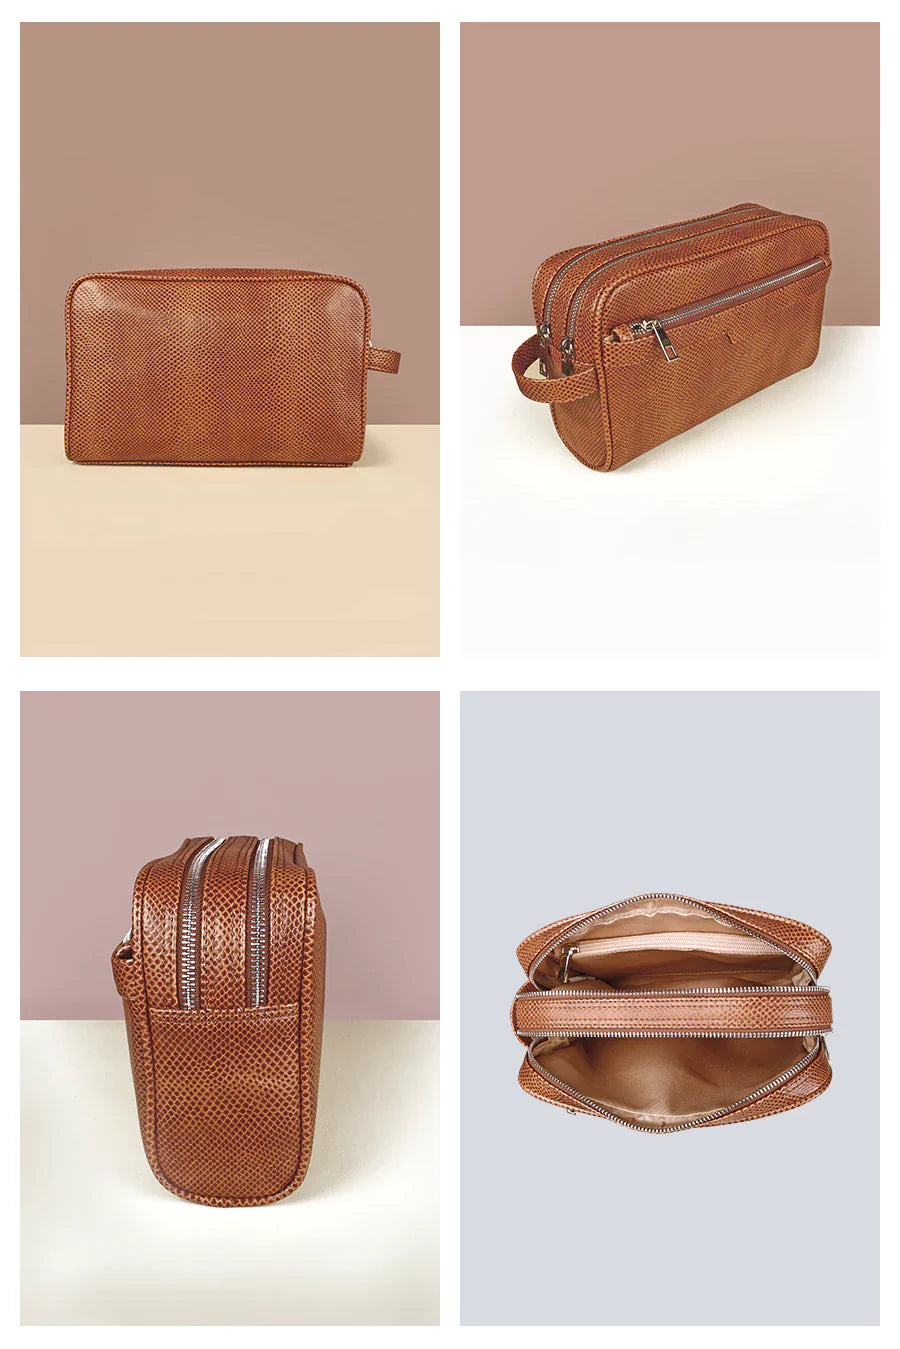 The Vegan Leather Travel Toiletry Pouch